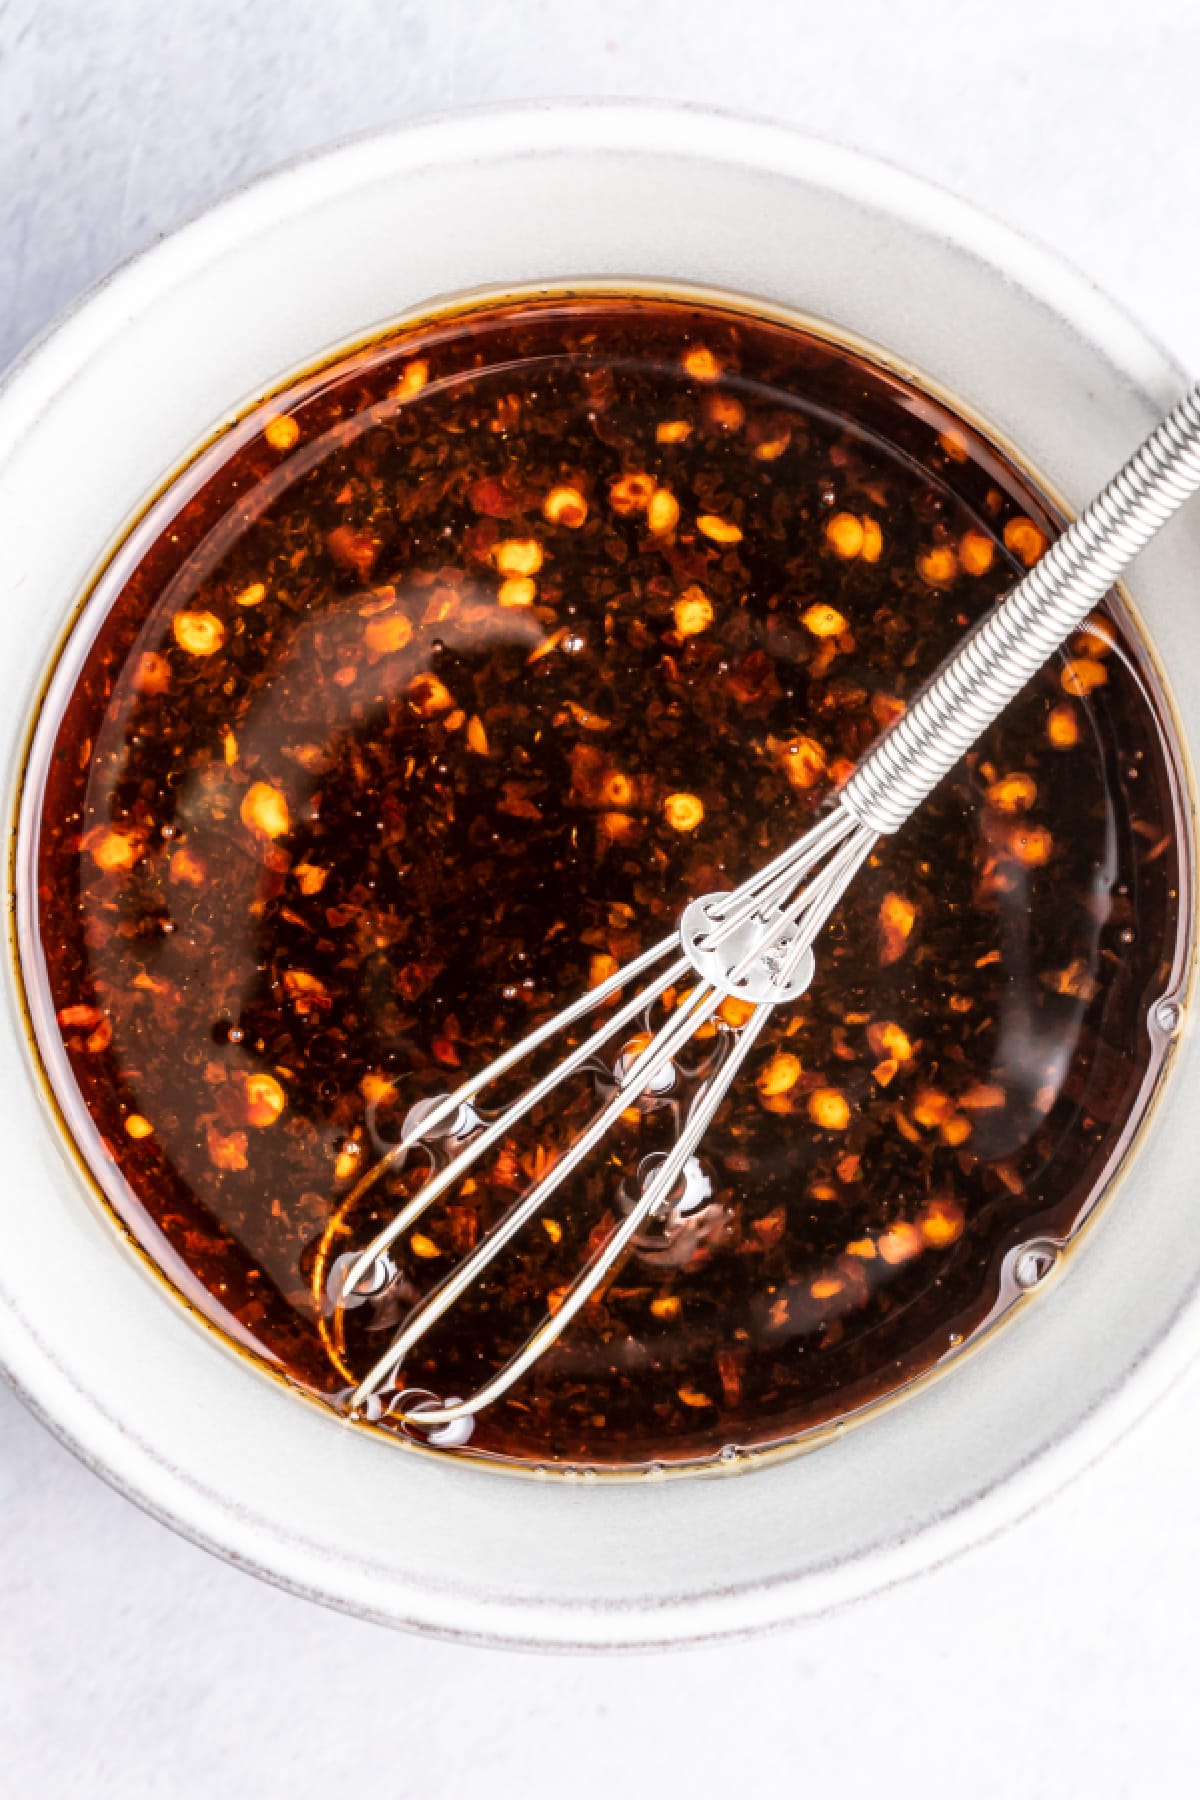 Overhead view of dark brown colored Asian salad dressing in a white bowl with a small silver whisk inside.